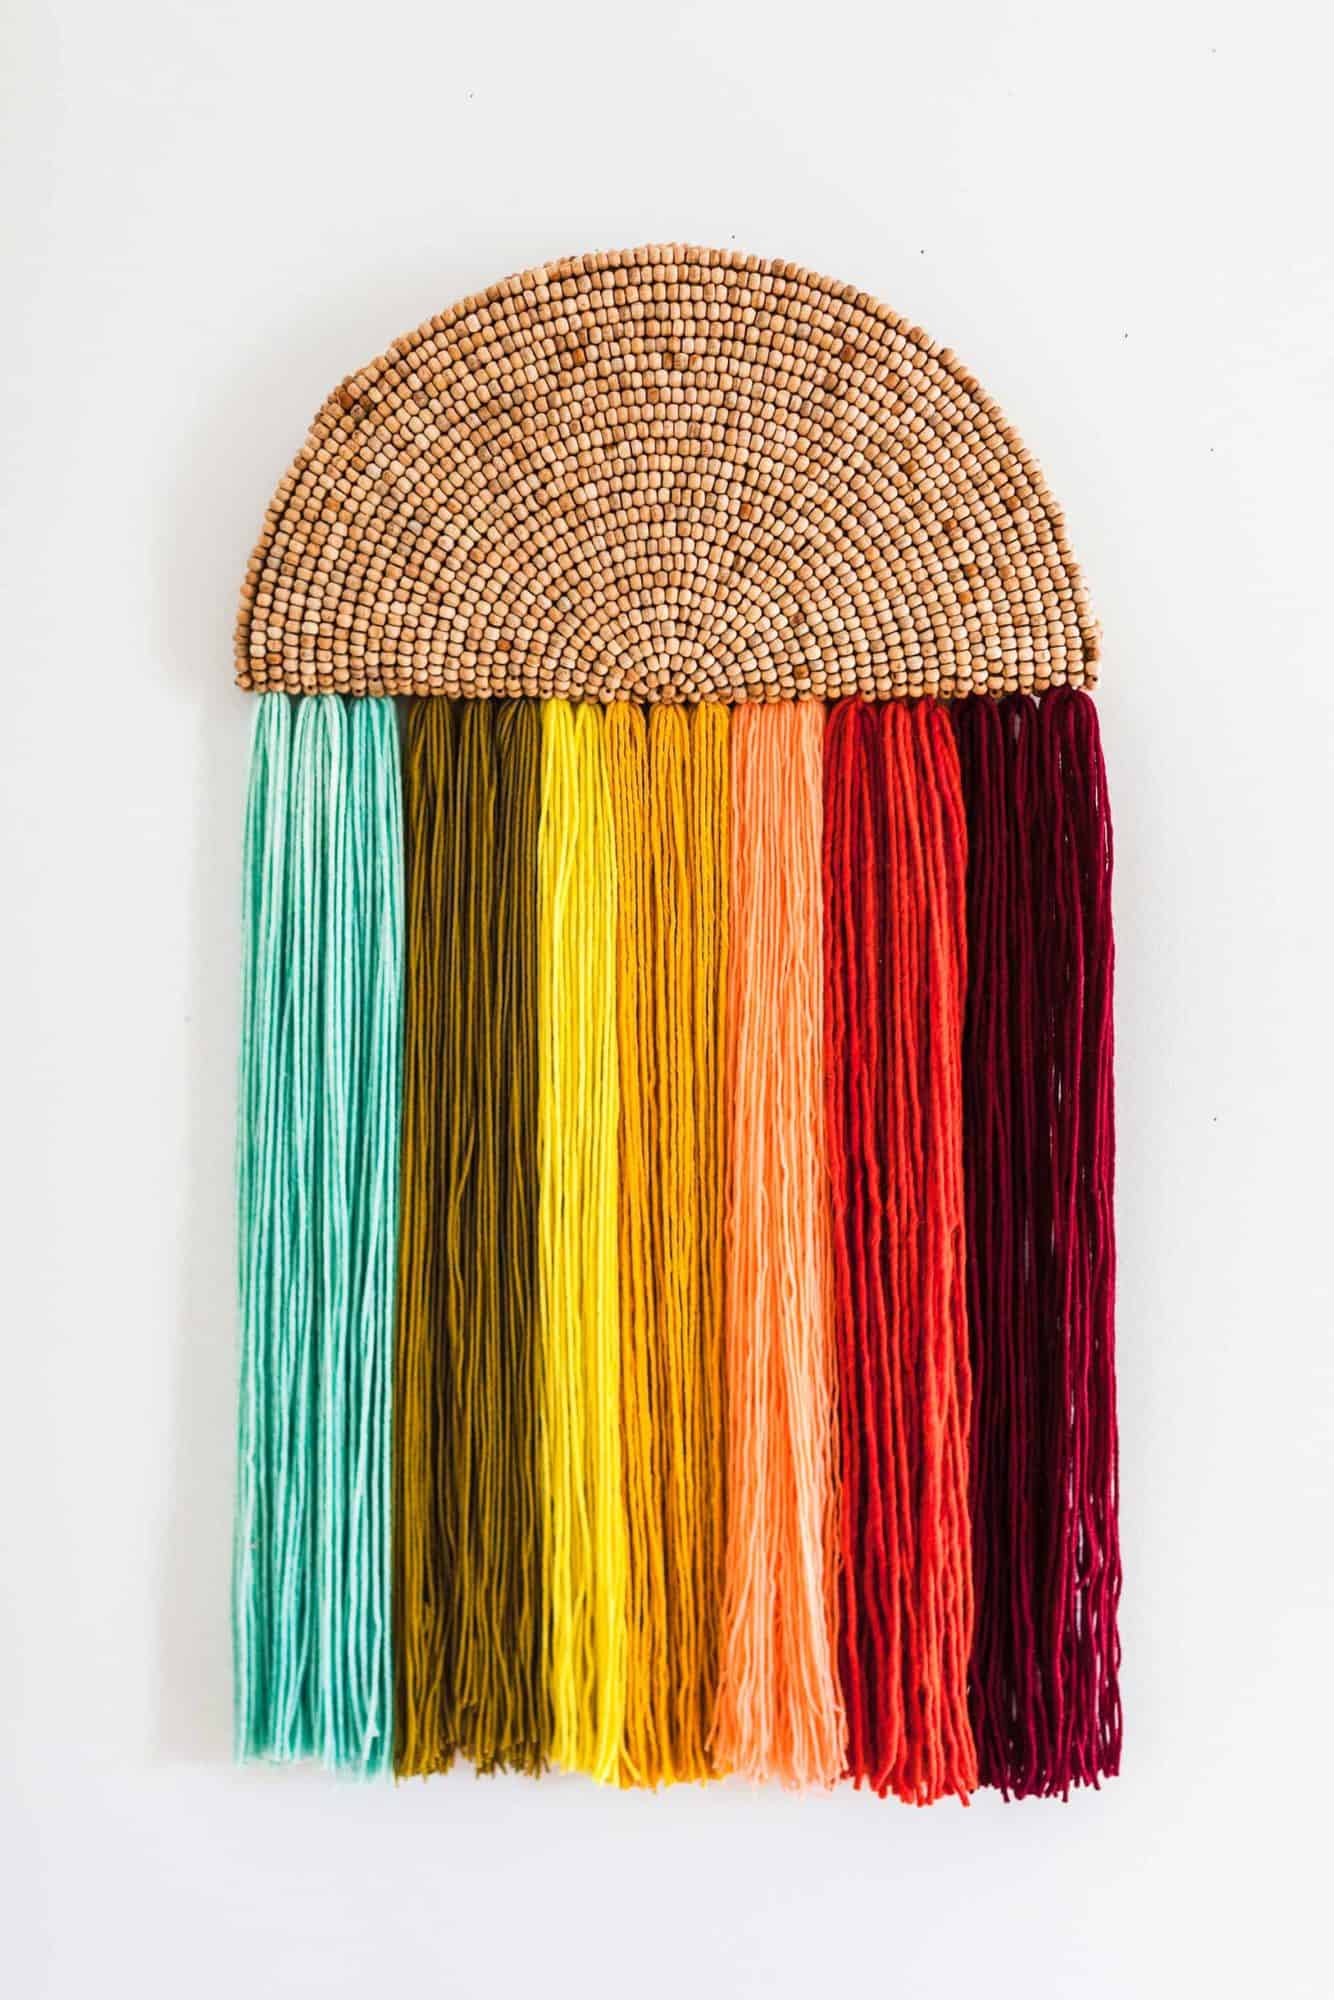 20 Projects That Use Yarn A Beautiful